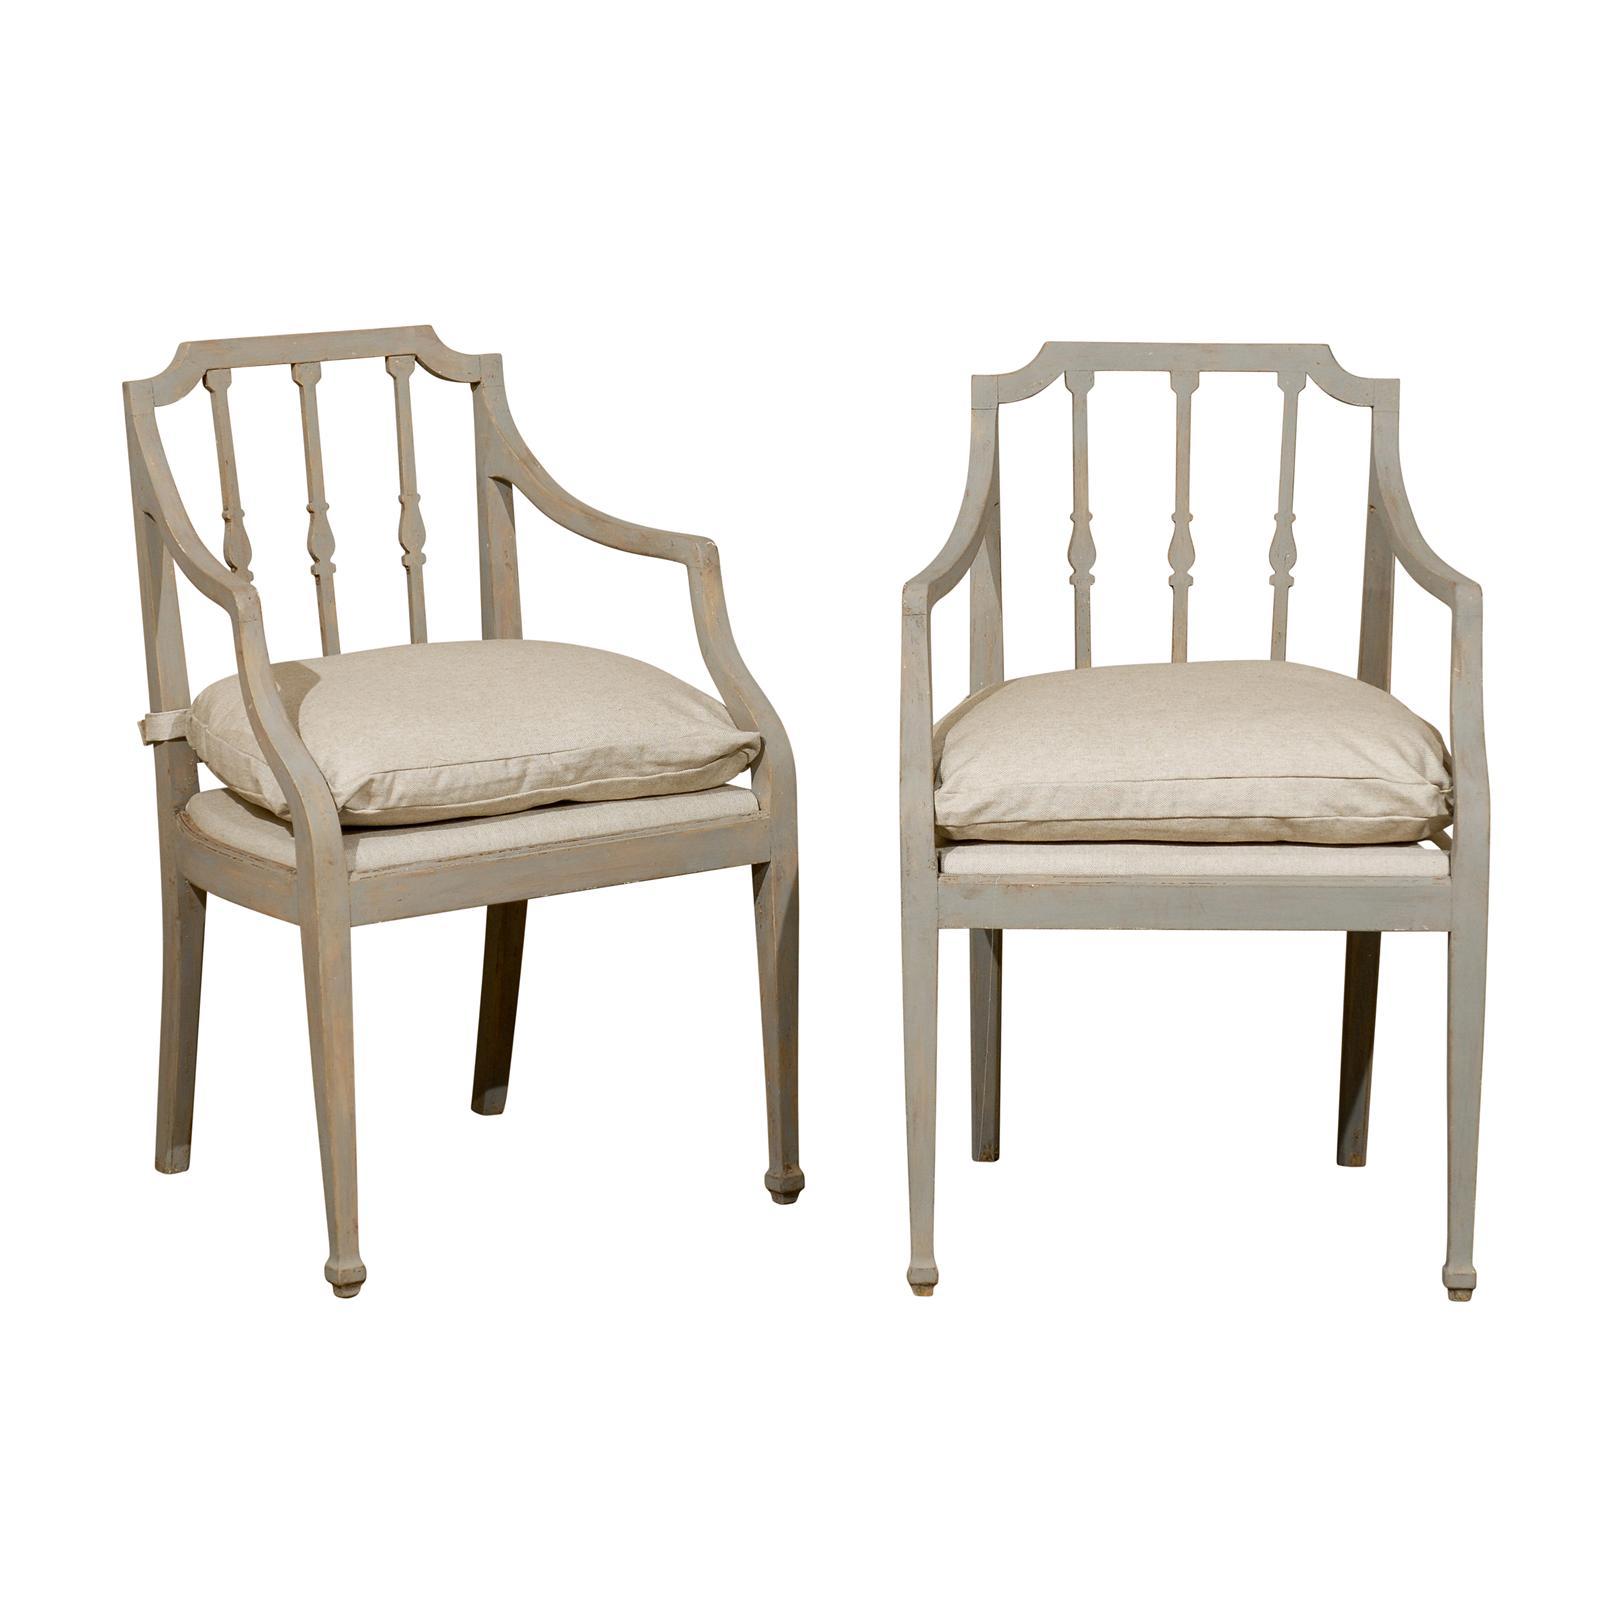 A Pair of Painted Wood Chairs from the Waldorf Astoria Hotel